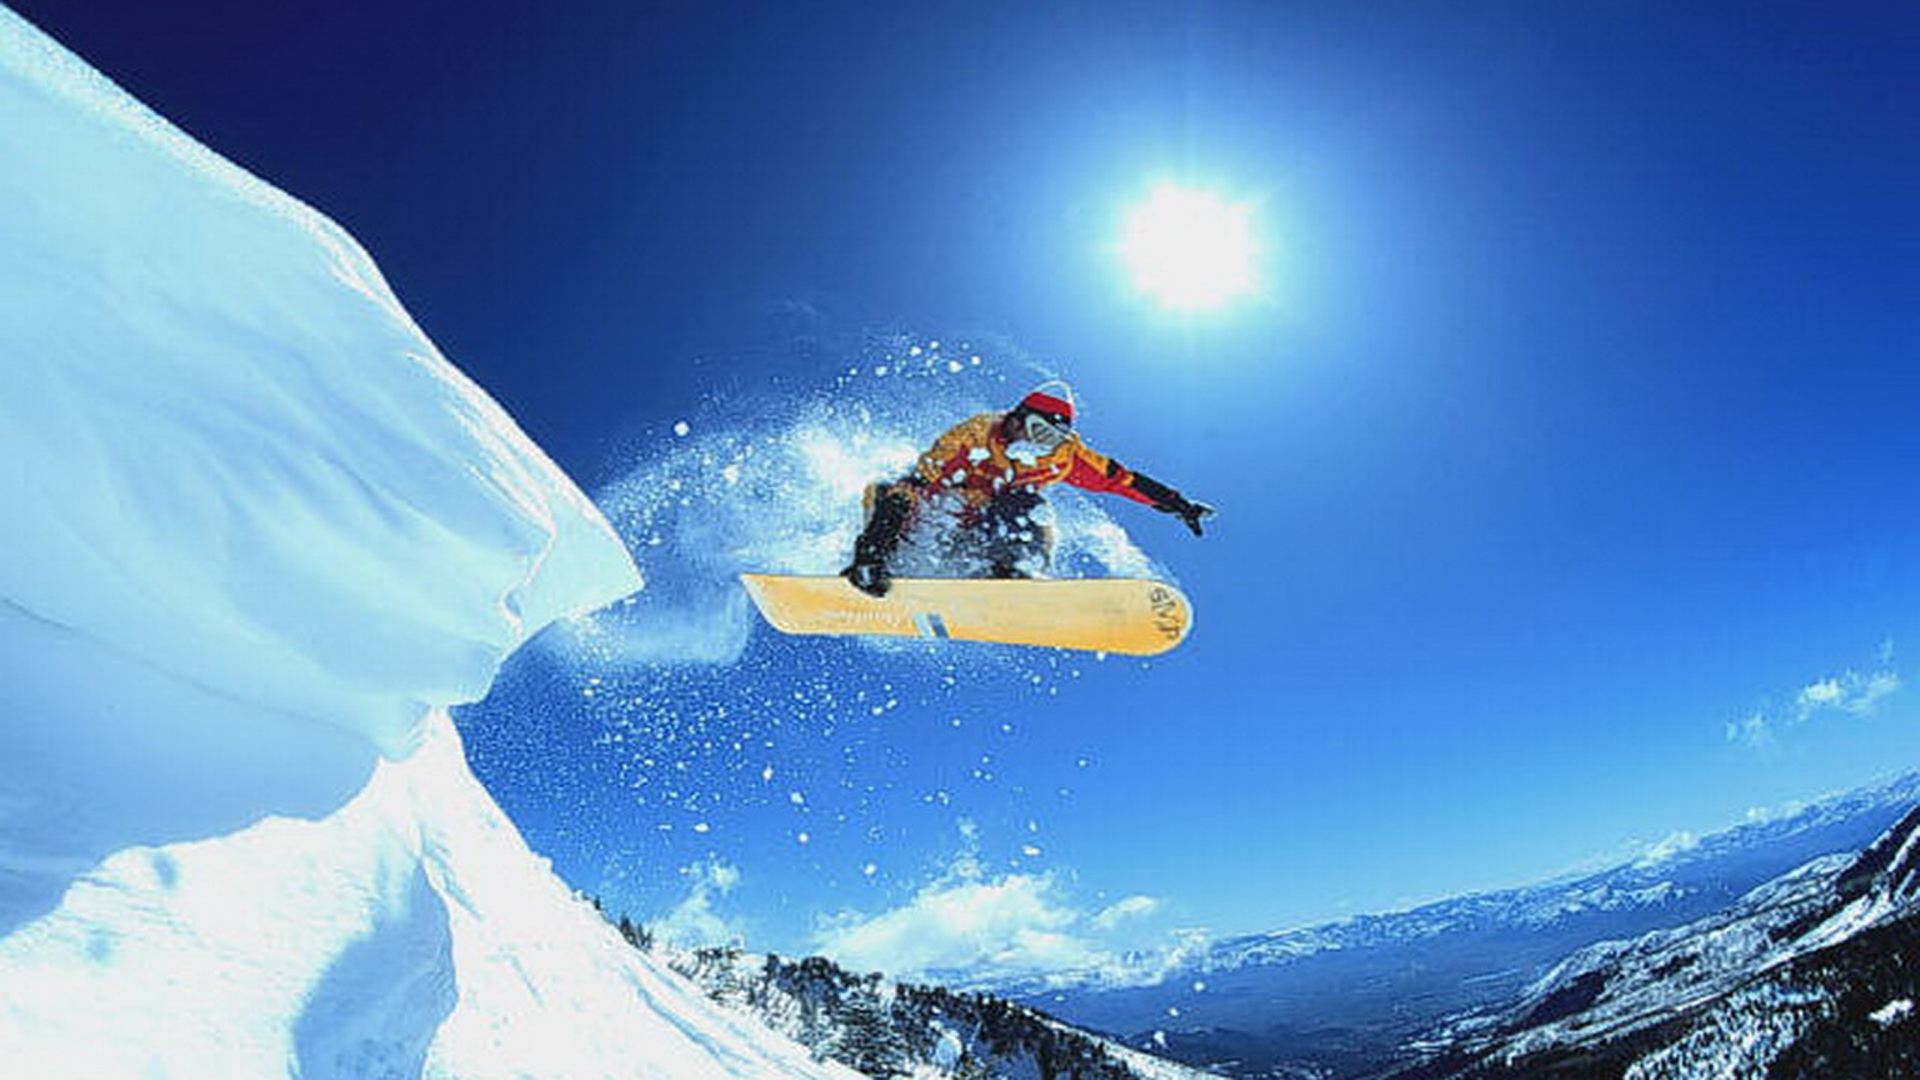 Snowboard Wallpaper Collection 44